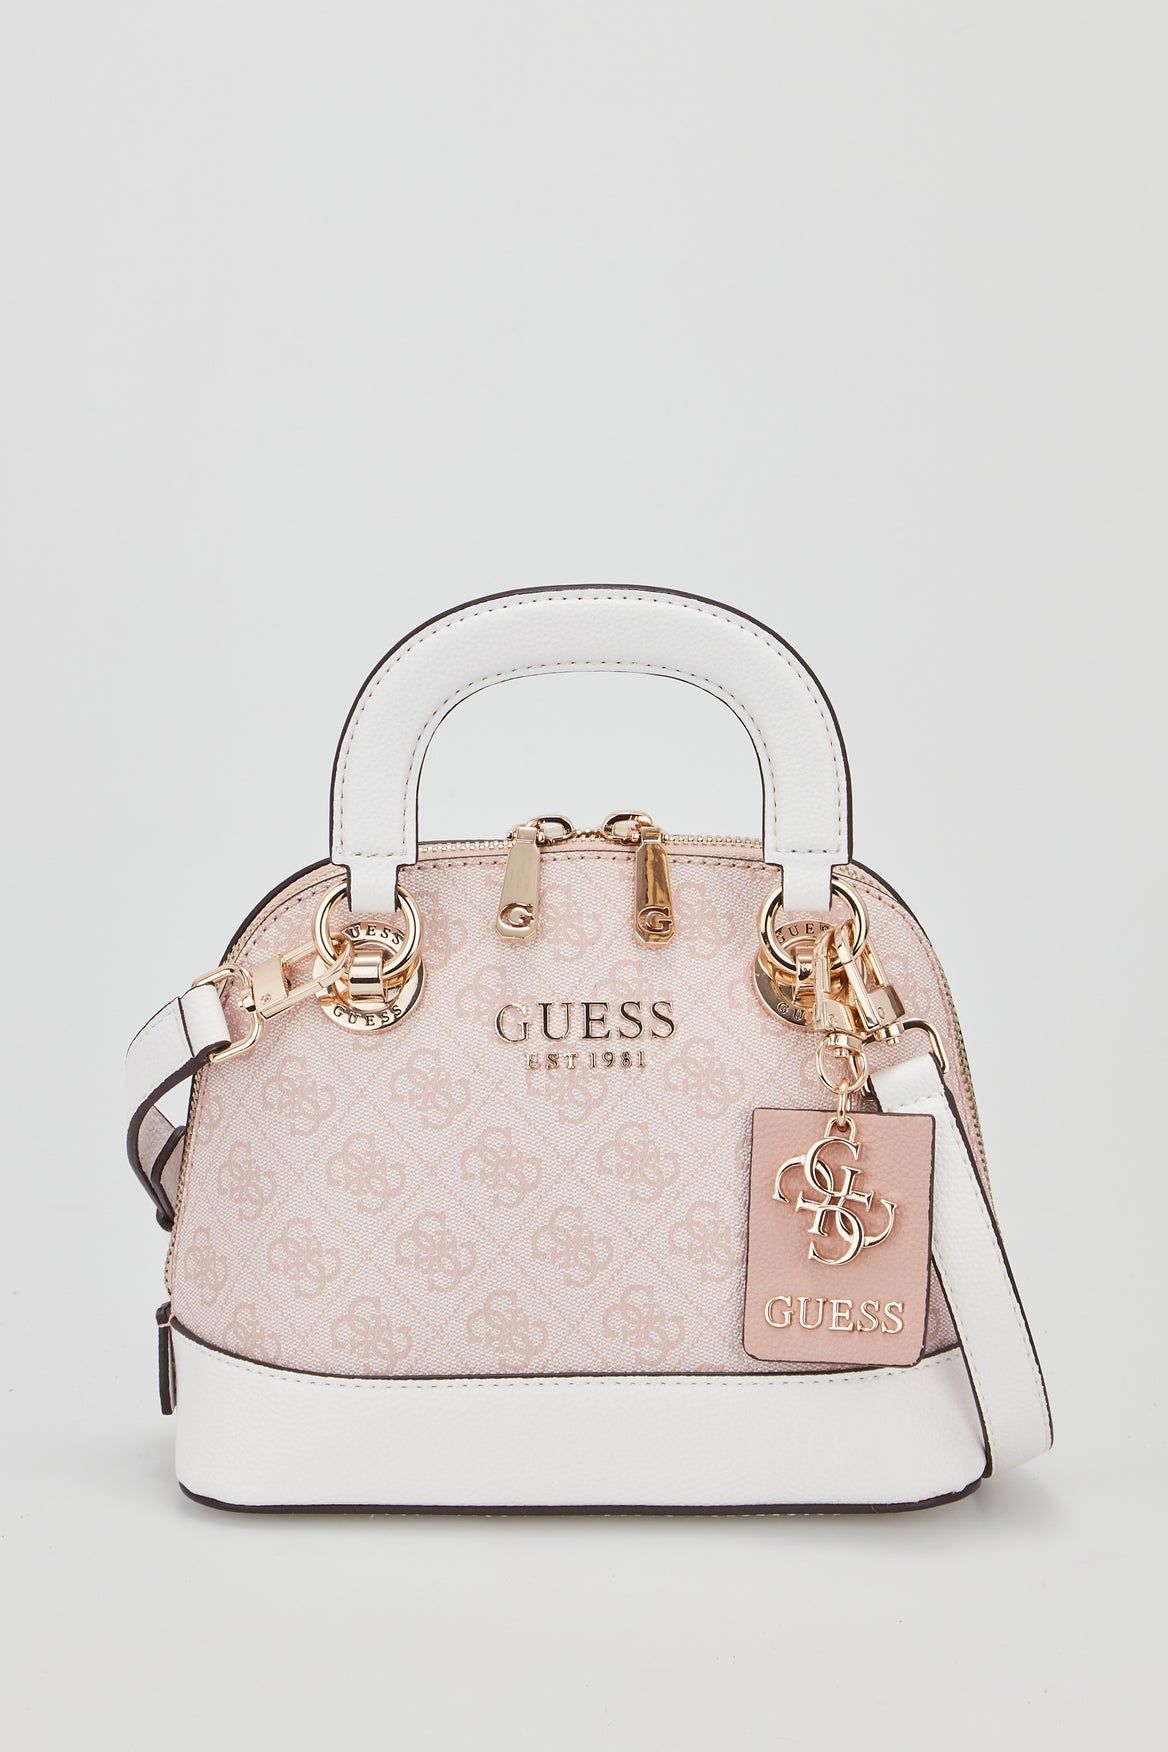 Guess Bags: Chic and Stylish Accessories for Every Occasion